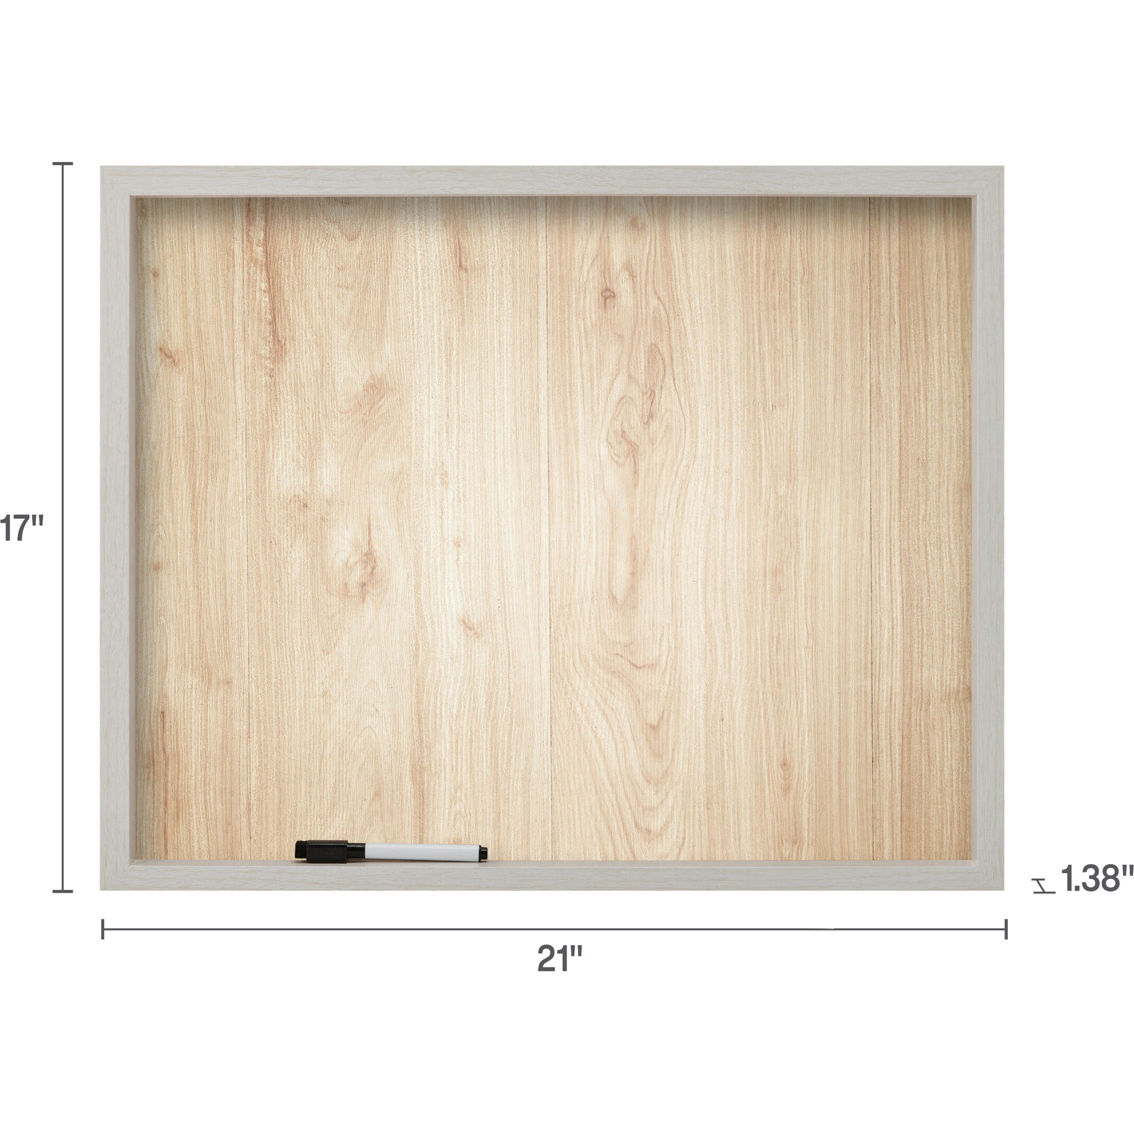 Mikasa Home 21 x 17 in. Natural Whiteboard with Pen - Image 5 of 5